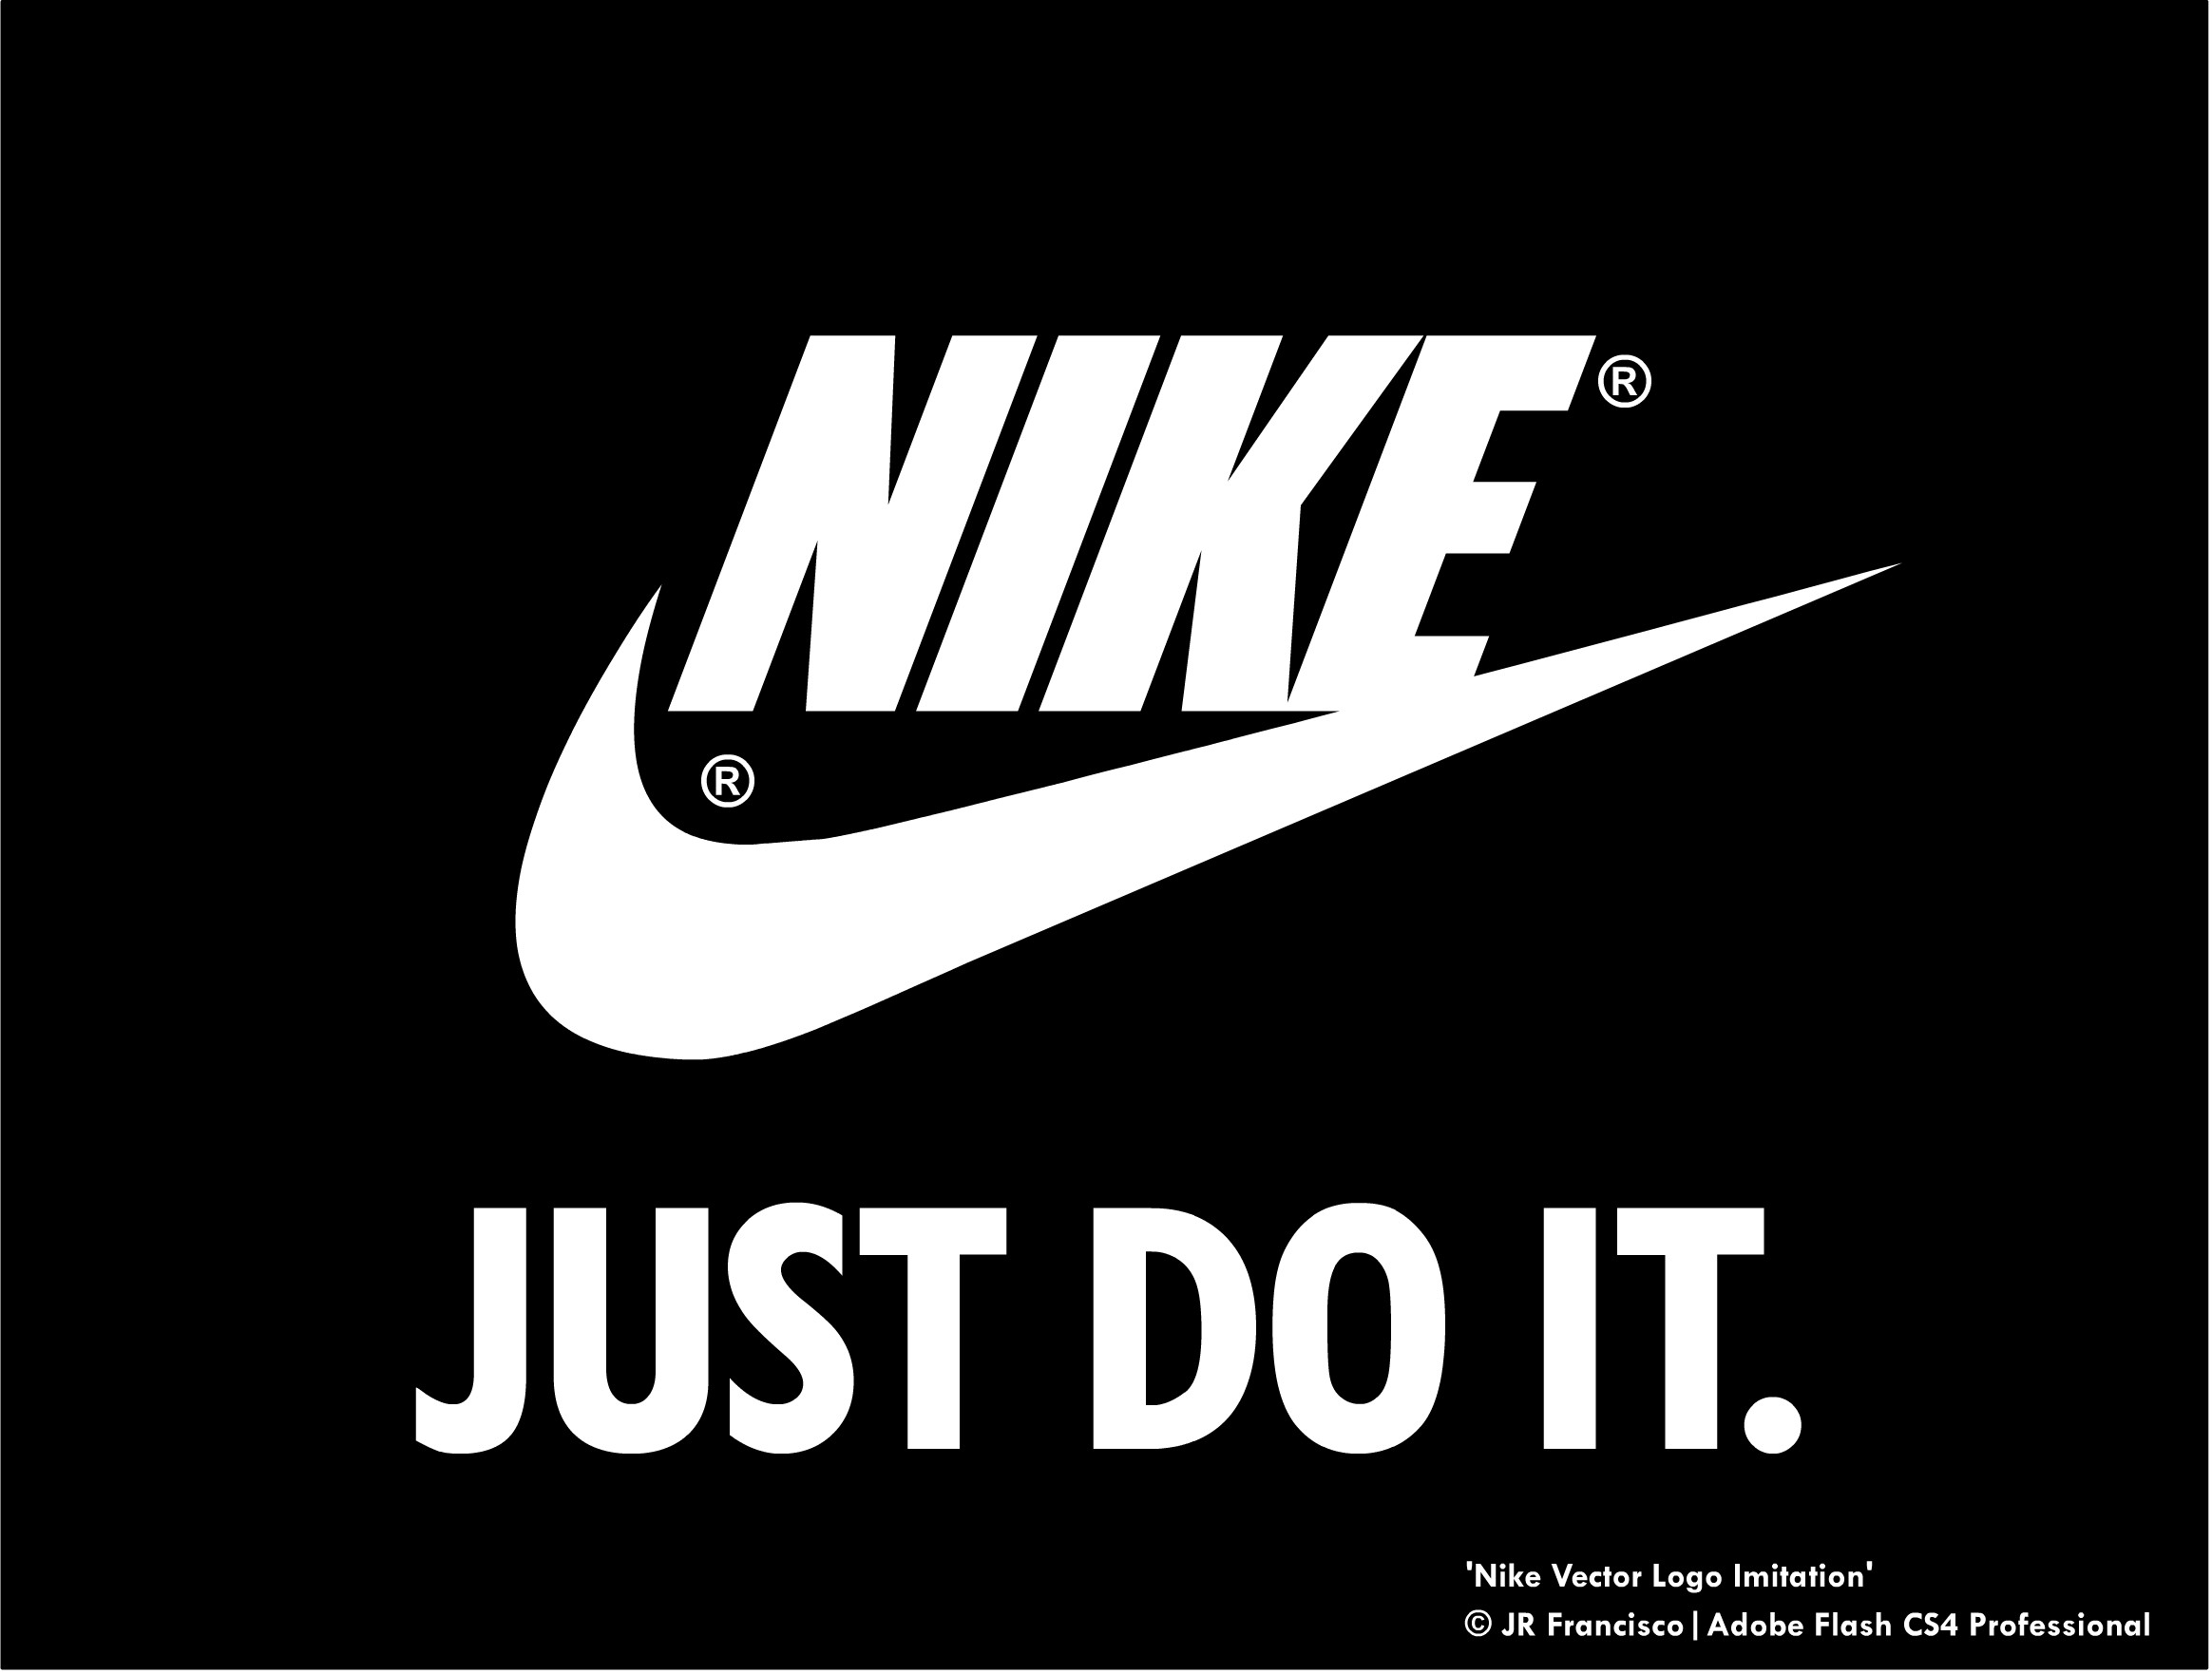 2328x1762 Nike Just Do it wallpapers Wallpapers) – Wallpapers